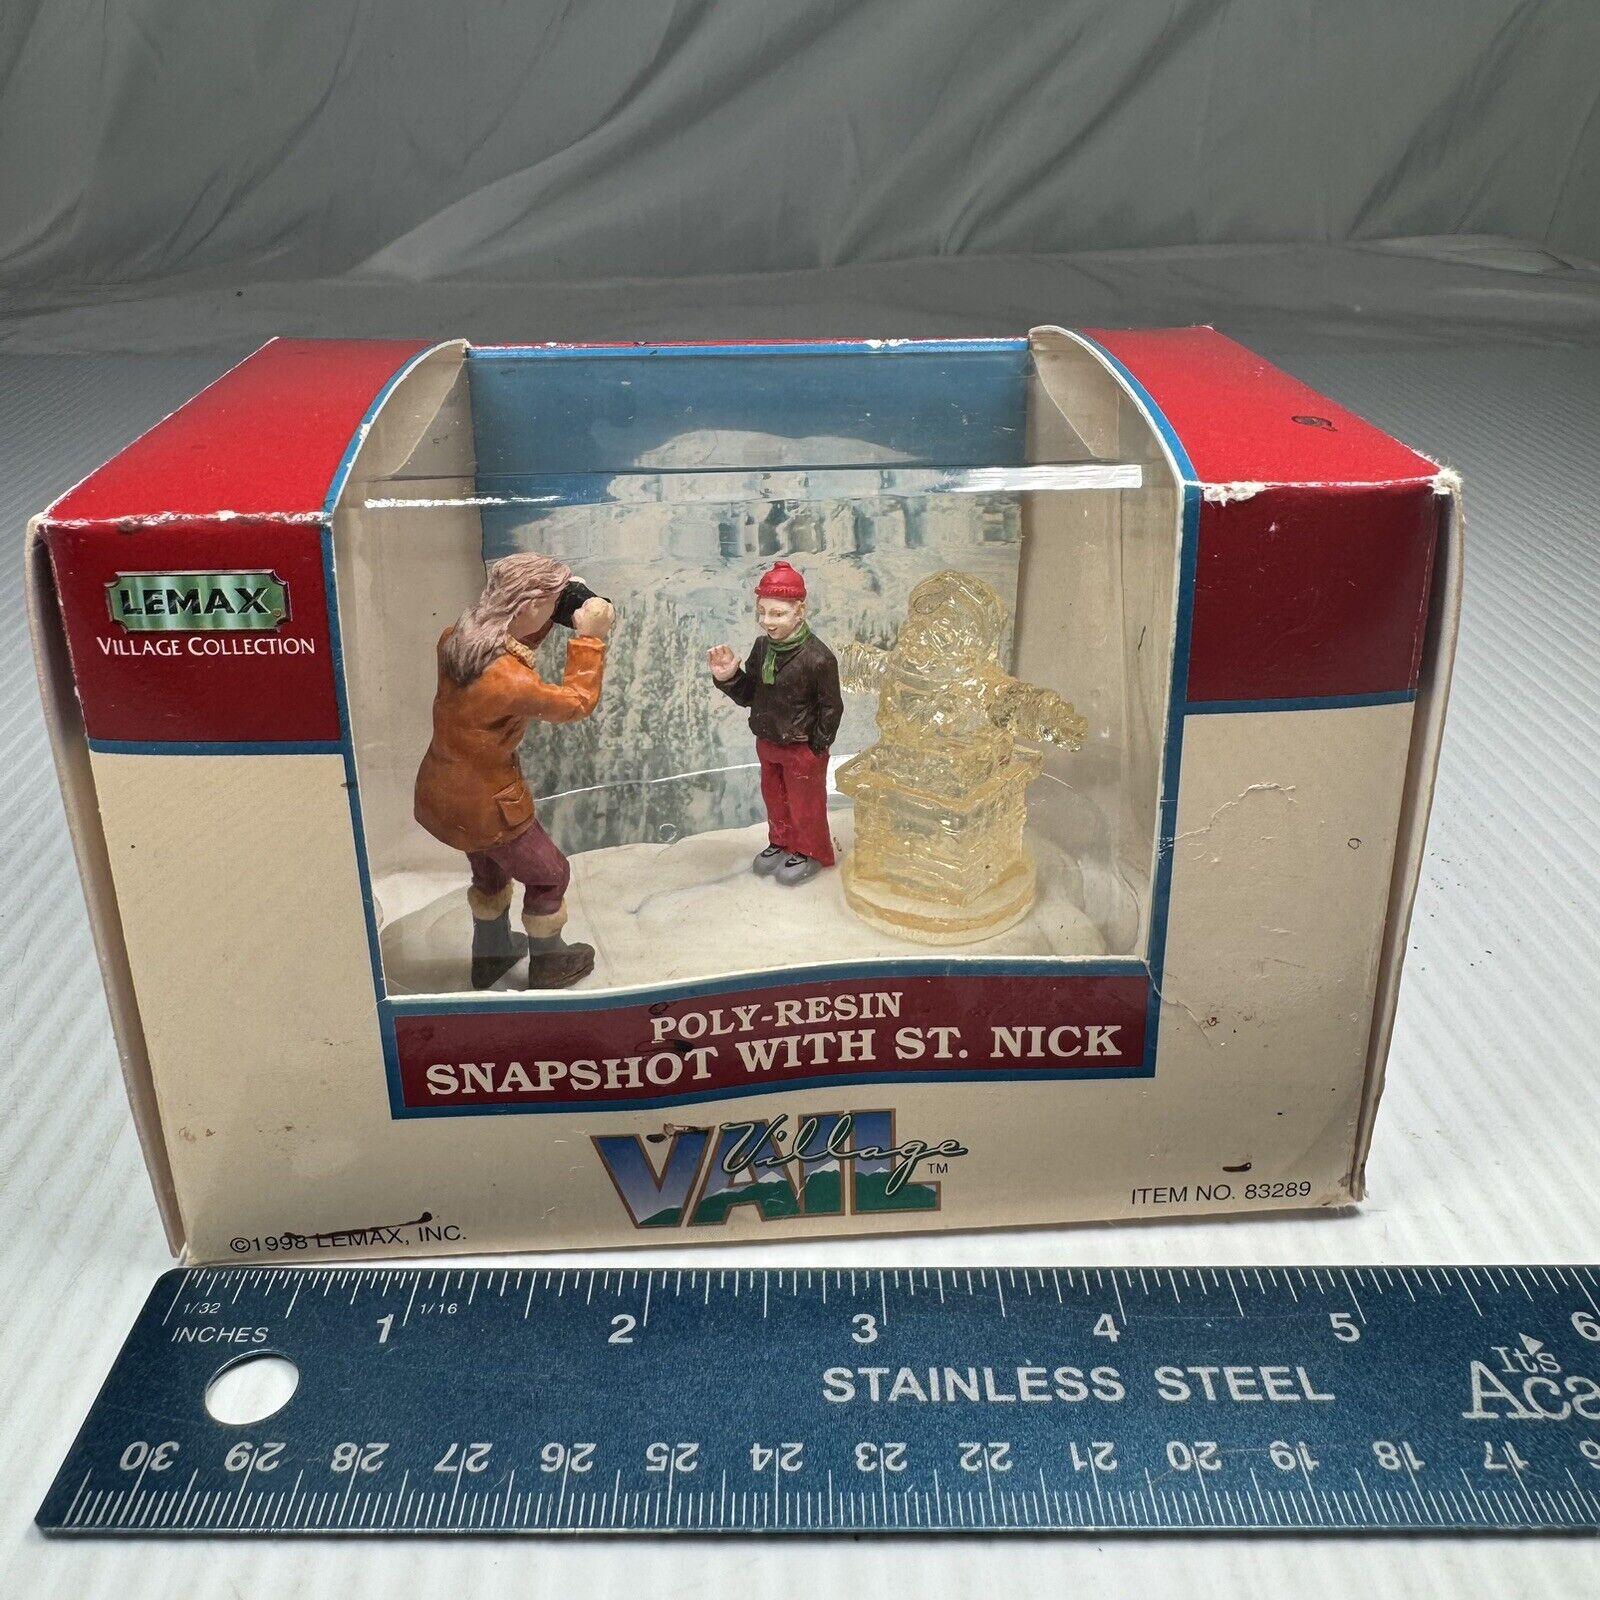 1998 Lemax Village Collection Snapshot with St. Nick #83289 Retired FIGURINE